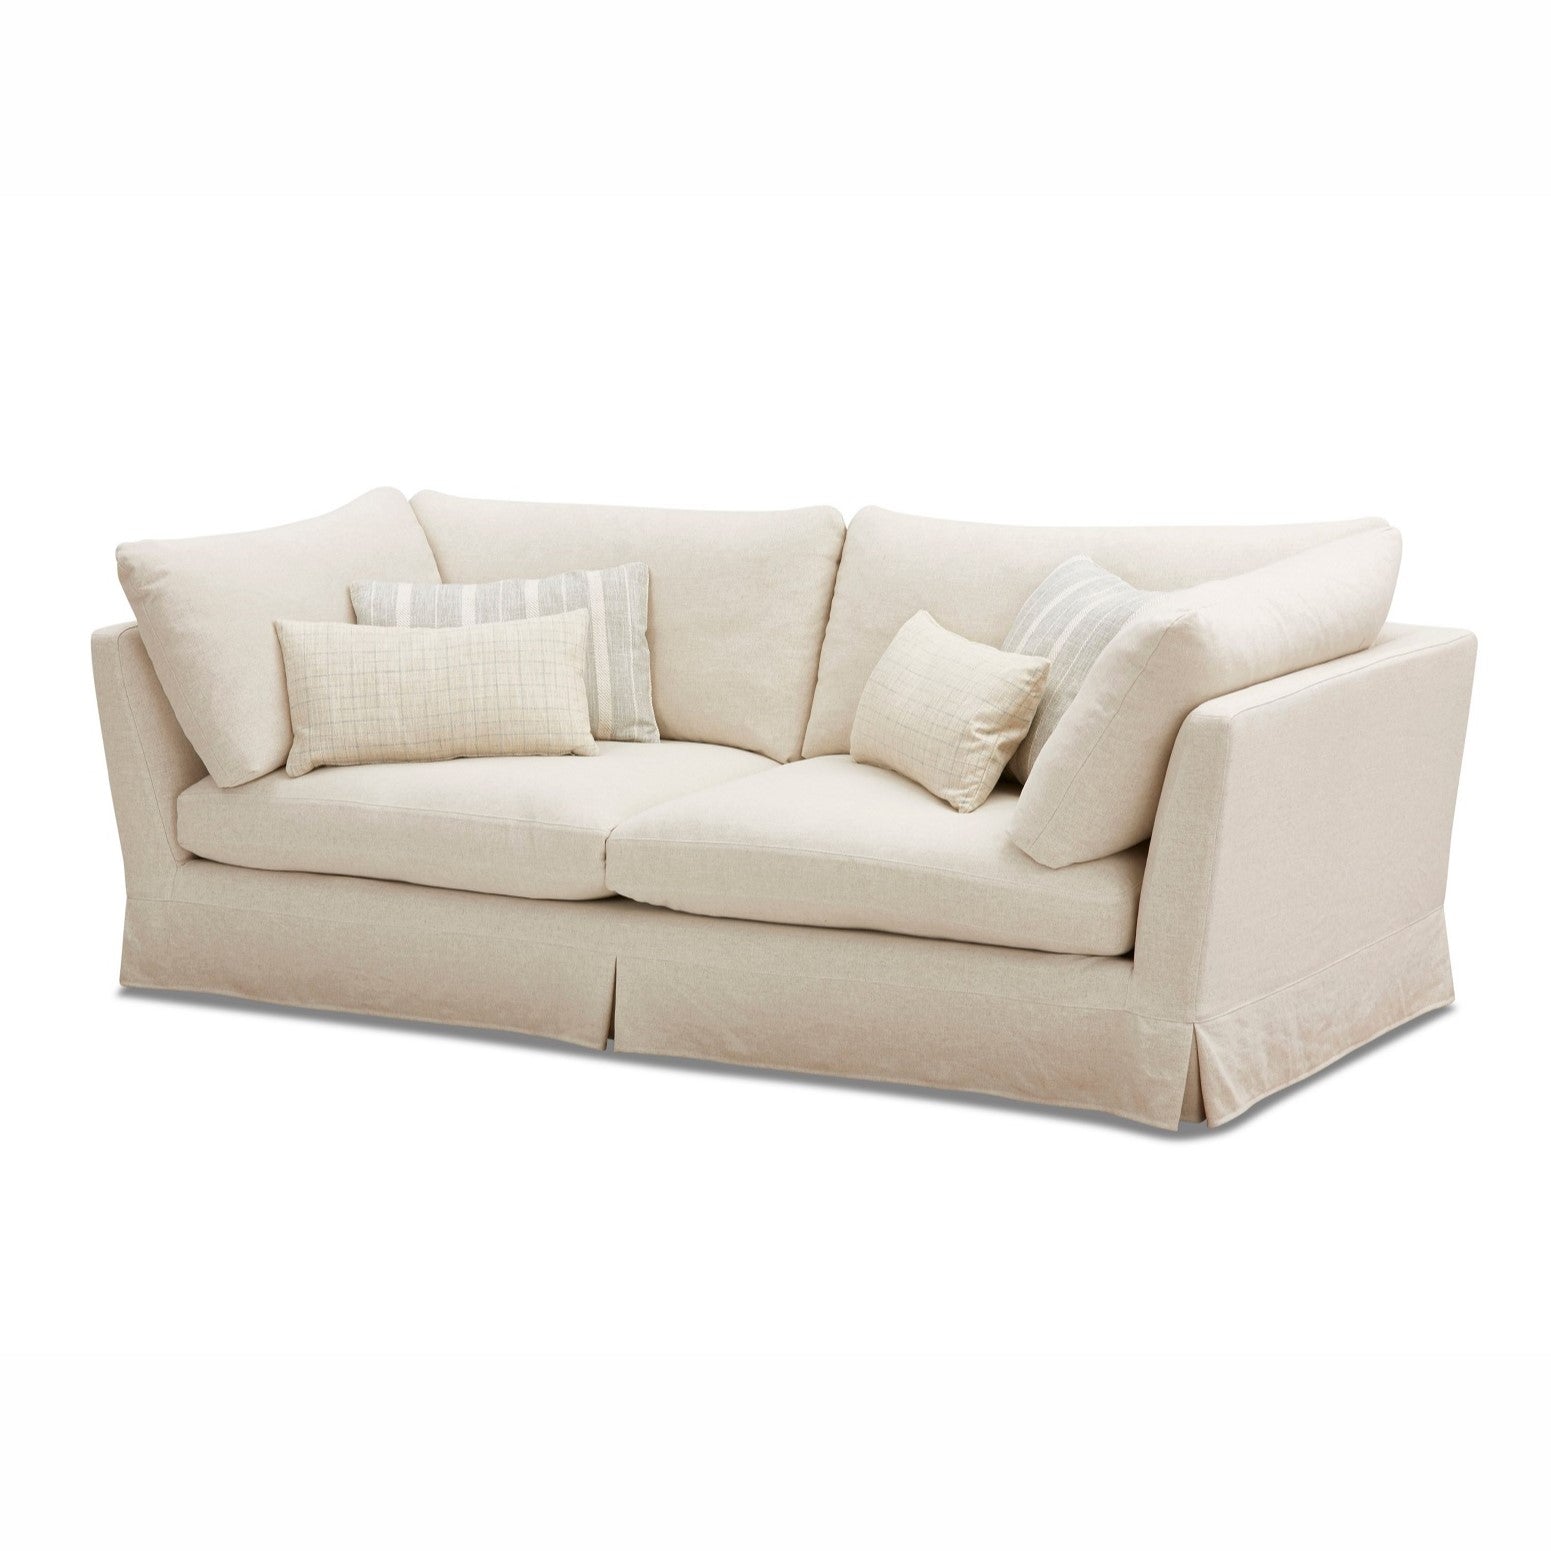 Lille Loose Cover Sofa by Molmic available from Make Your House A Home, Furniture Store located in Bendigo, Victoria. Australian Made in Melbourne.